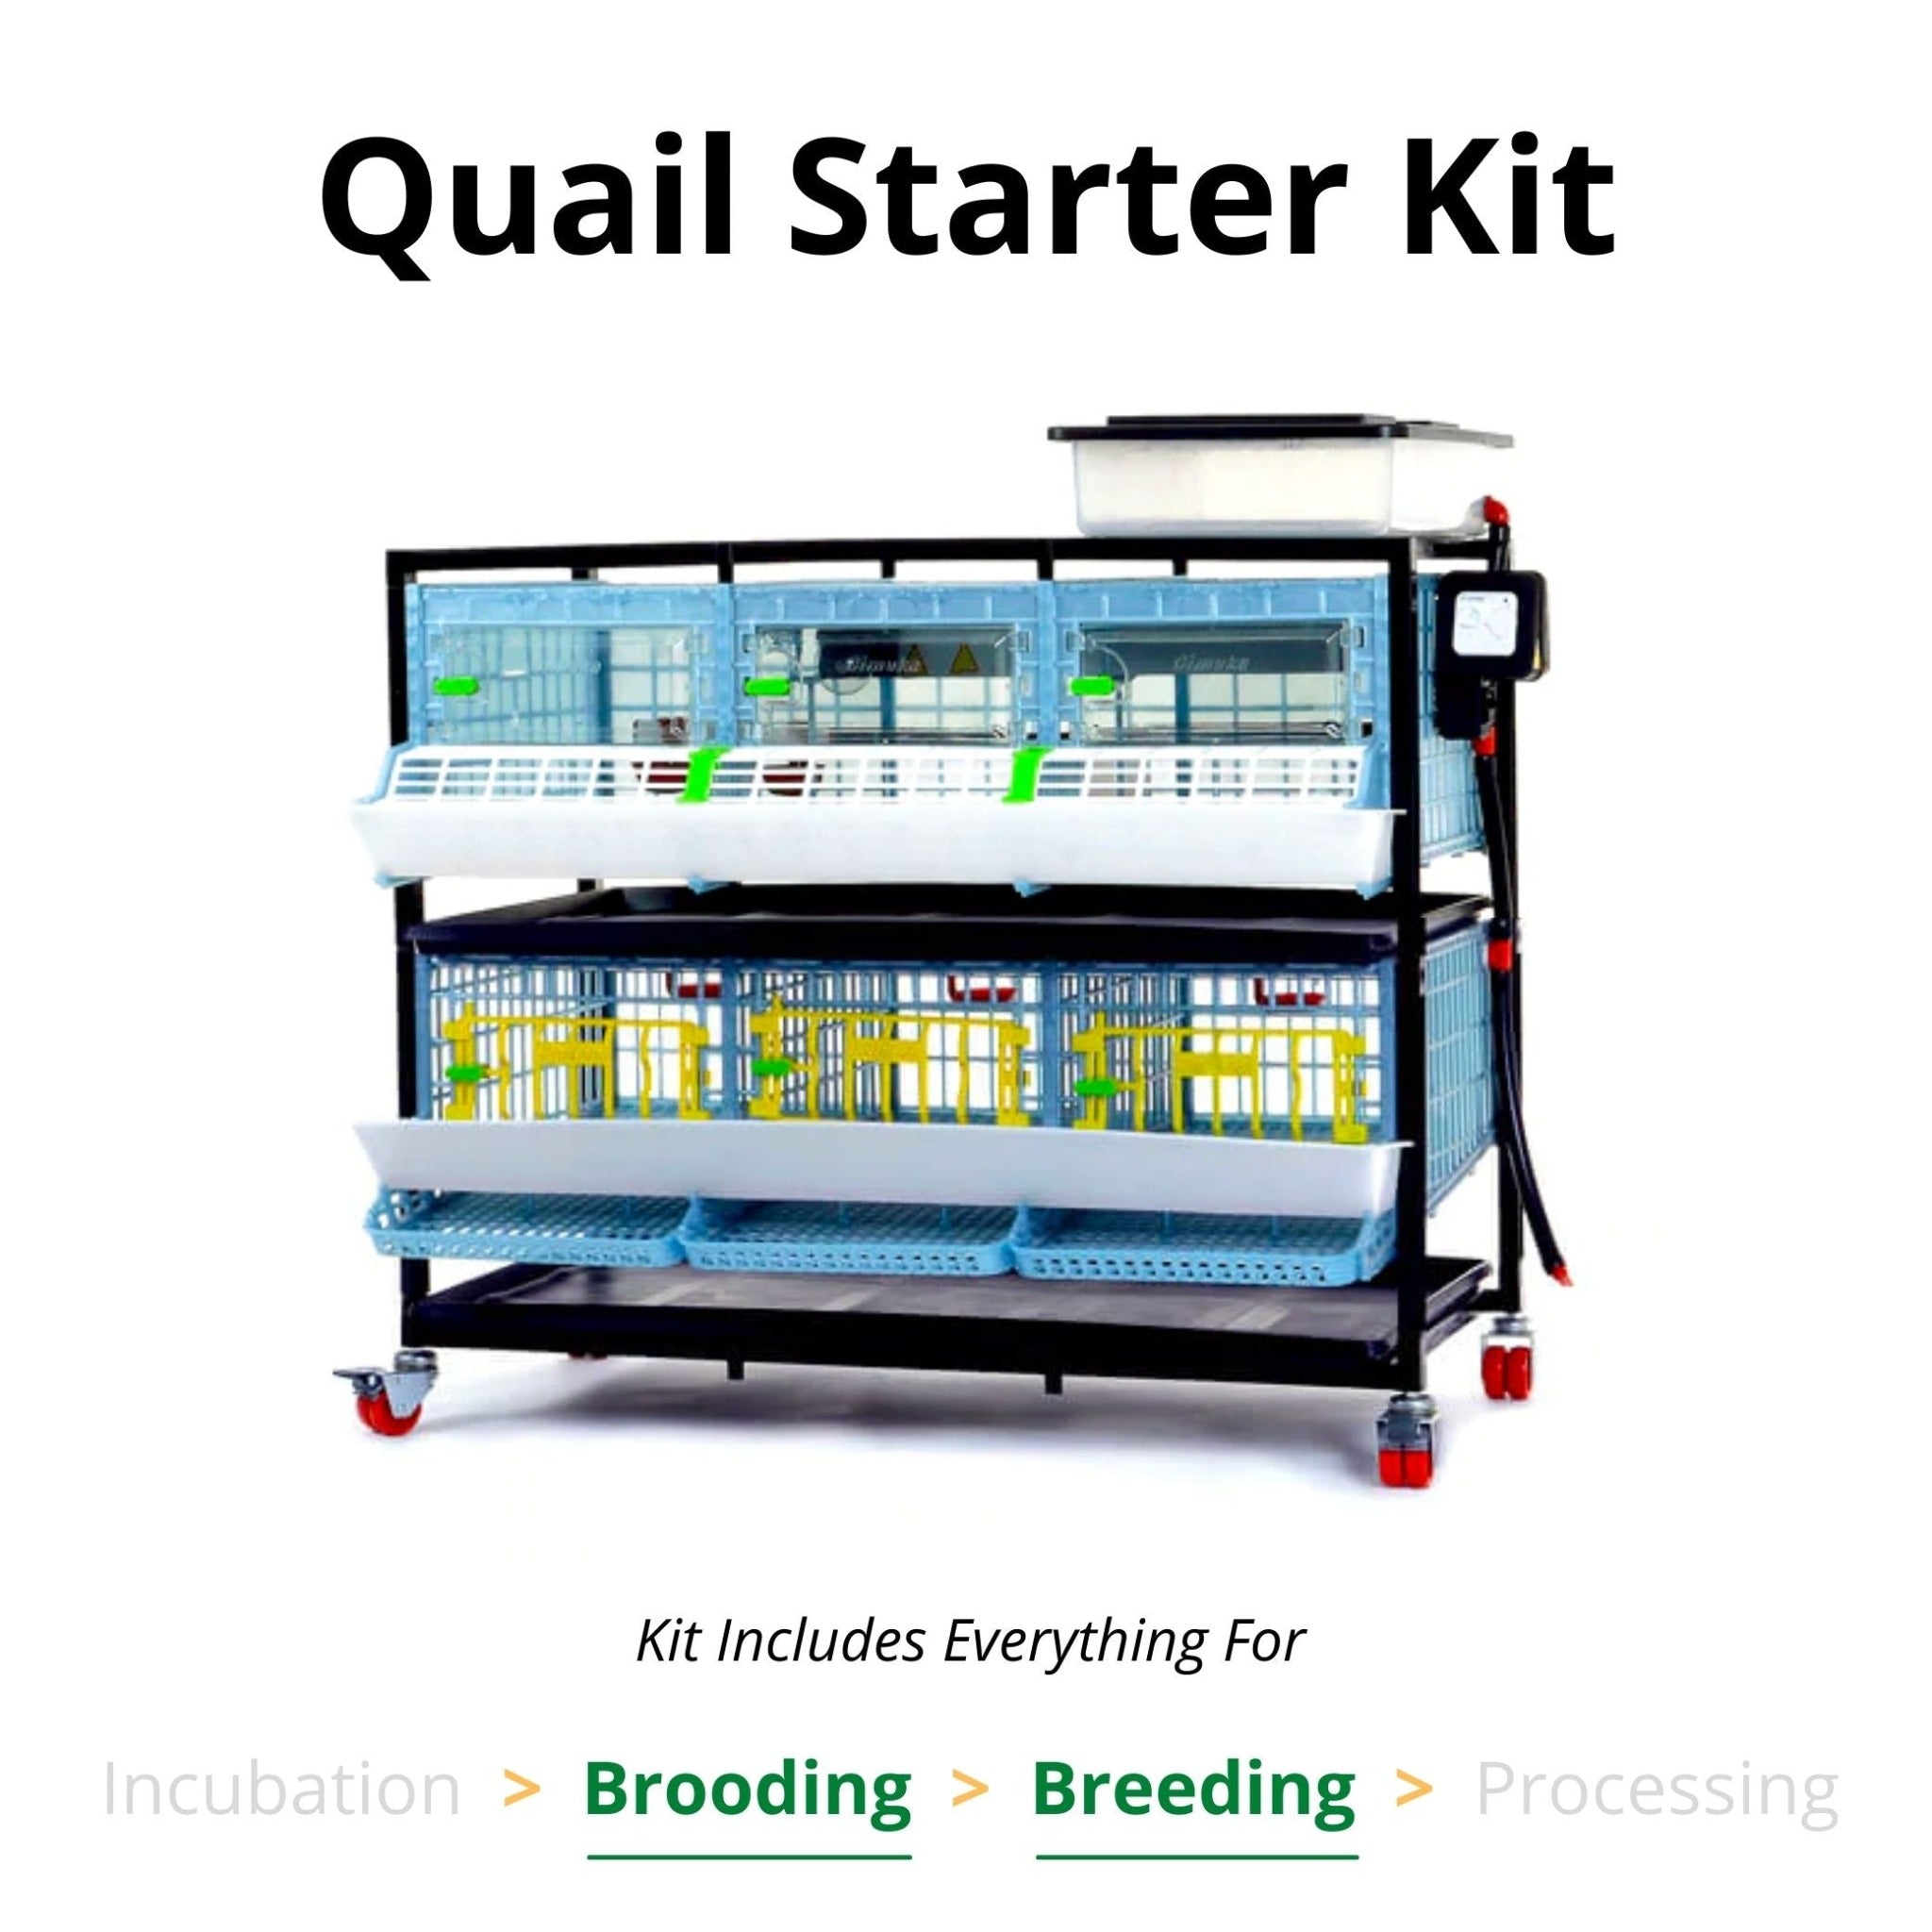 Hatching Time Cimuka. 9.5 inch chick brooder and quail cage combo is seen in image as a kit. Water tank can be seen on top of Quail starter kit. Text reads: Quail Starter Kit. Kit includes everything for Brooding to Breeding.